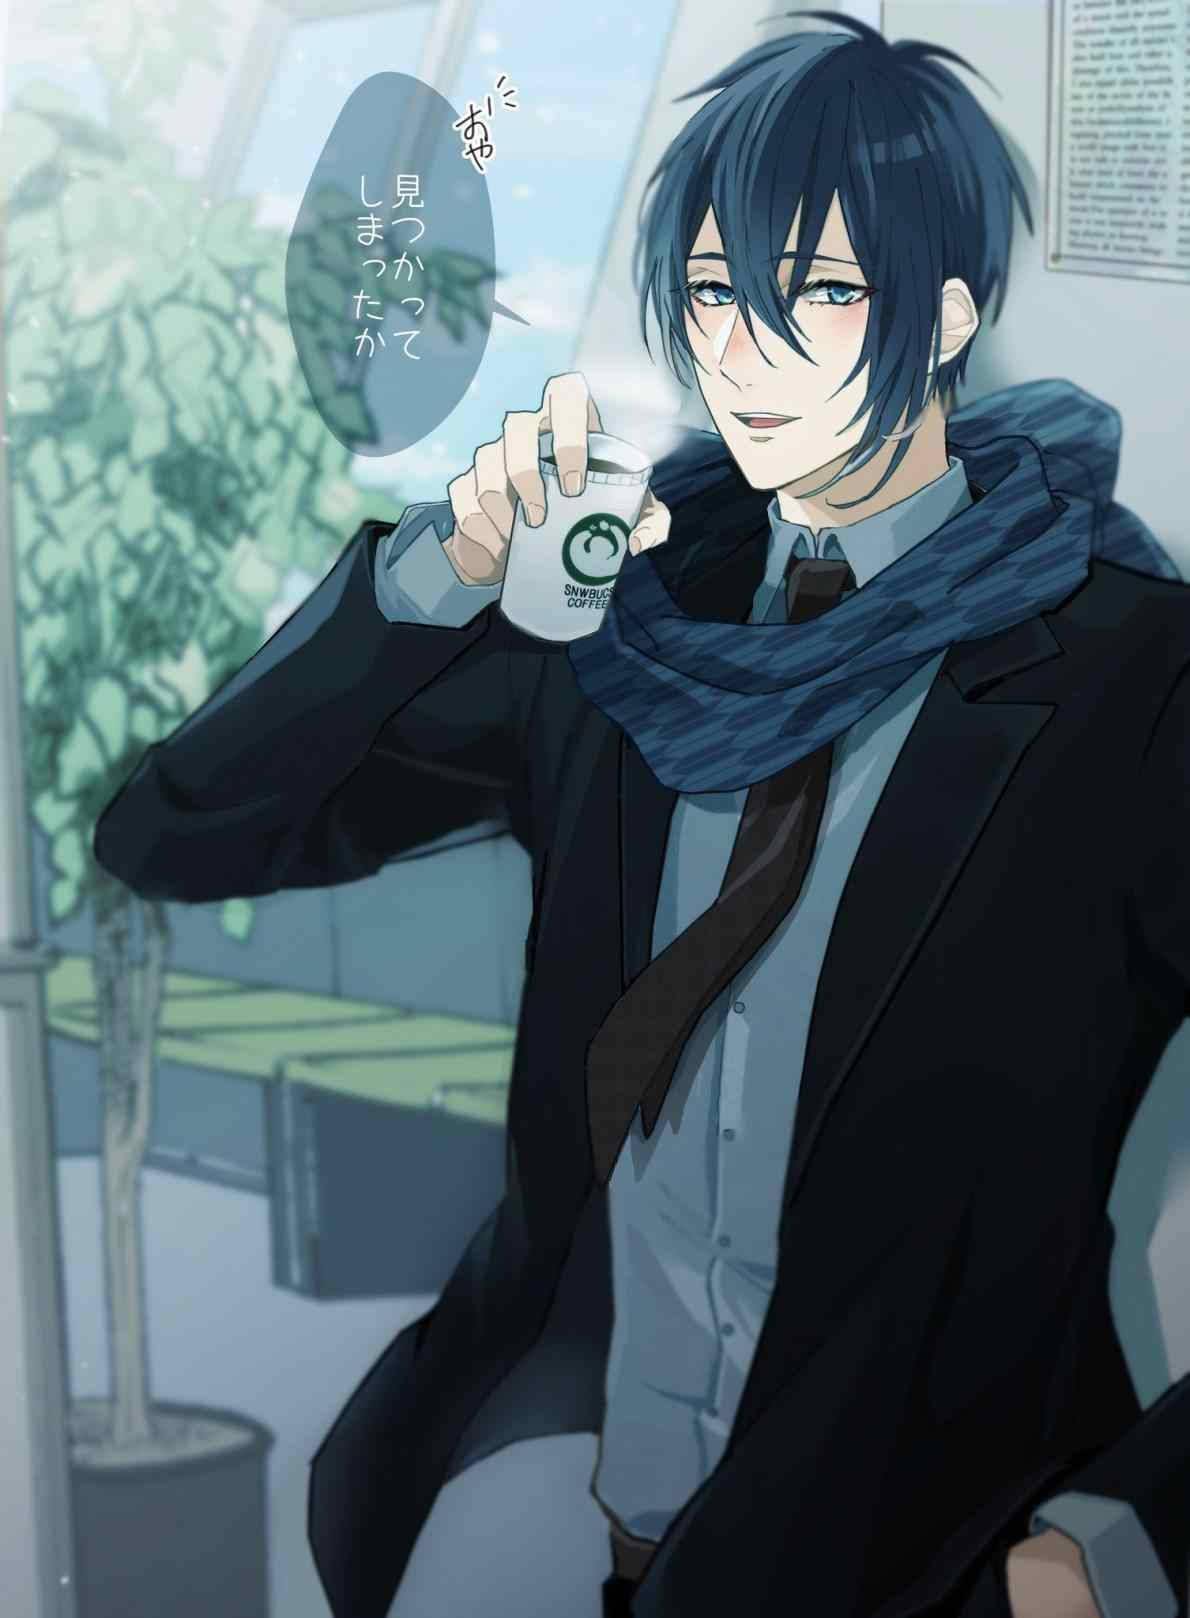 Enjoying A Cup Of Coffee, This Handsome Anime Boy Is Content. Background